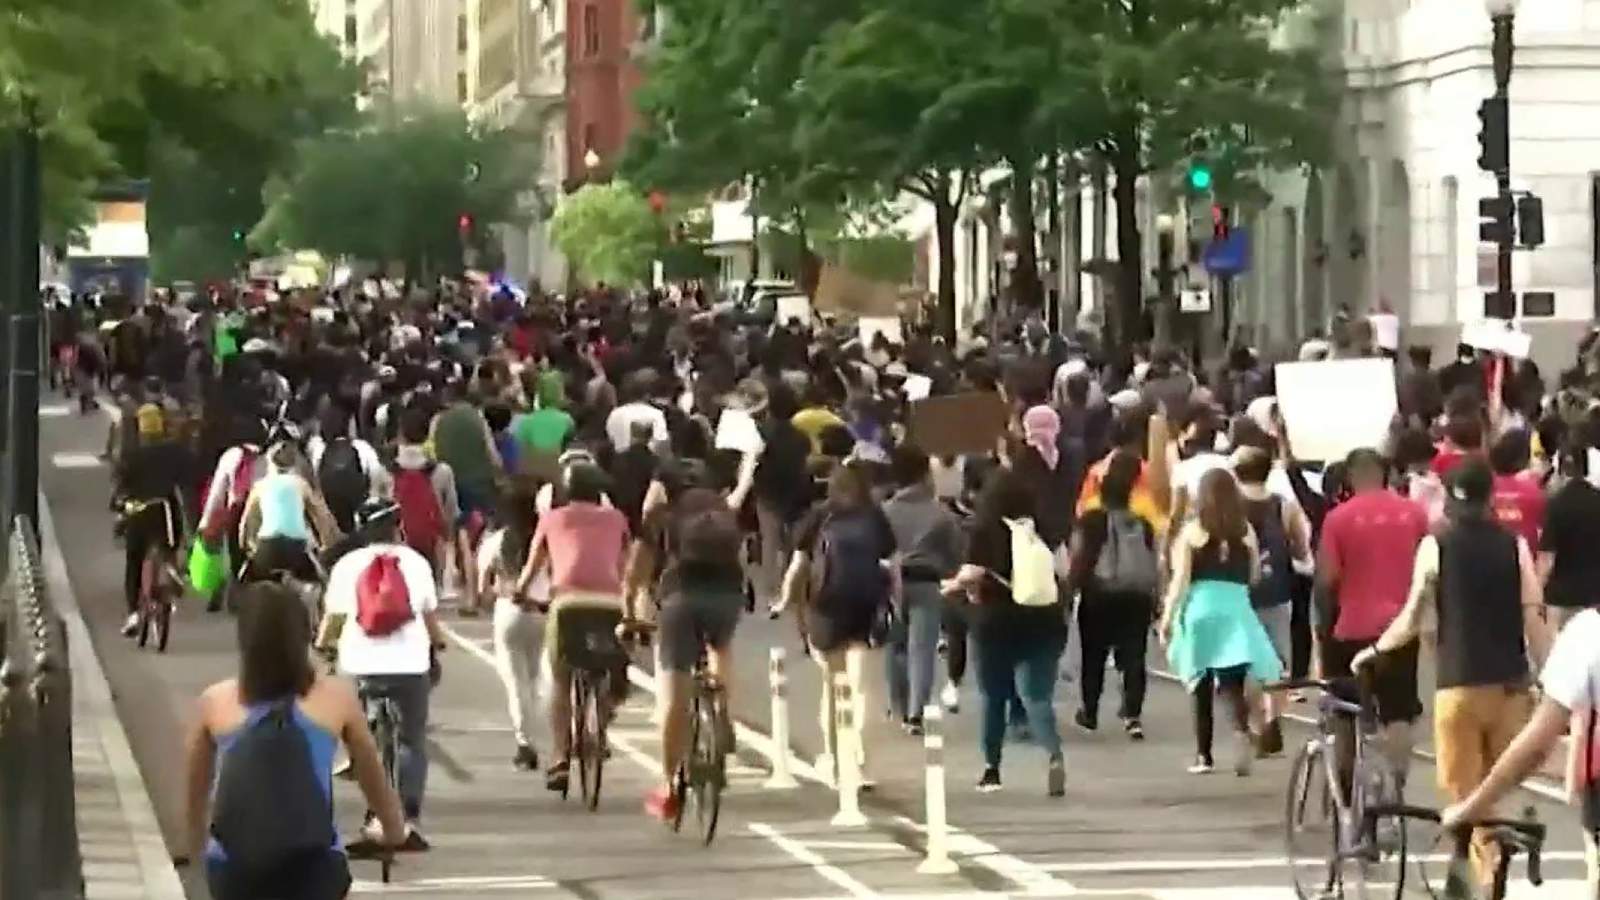 Protests, some violent, spread in wake of George Floyd death